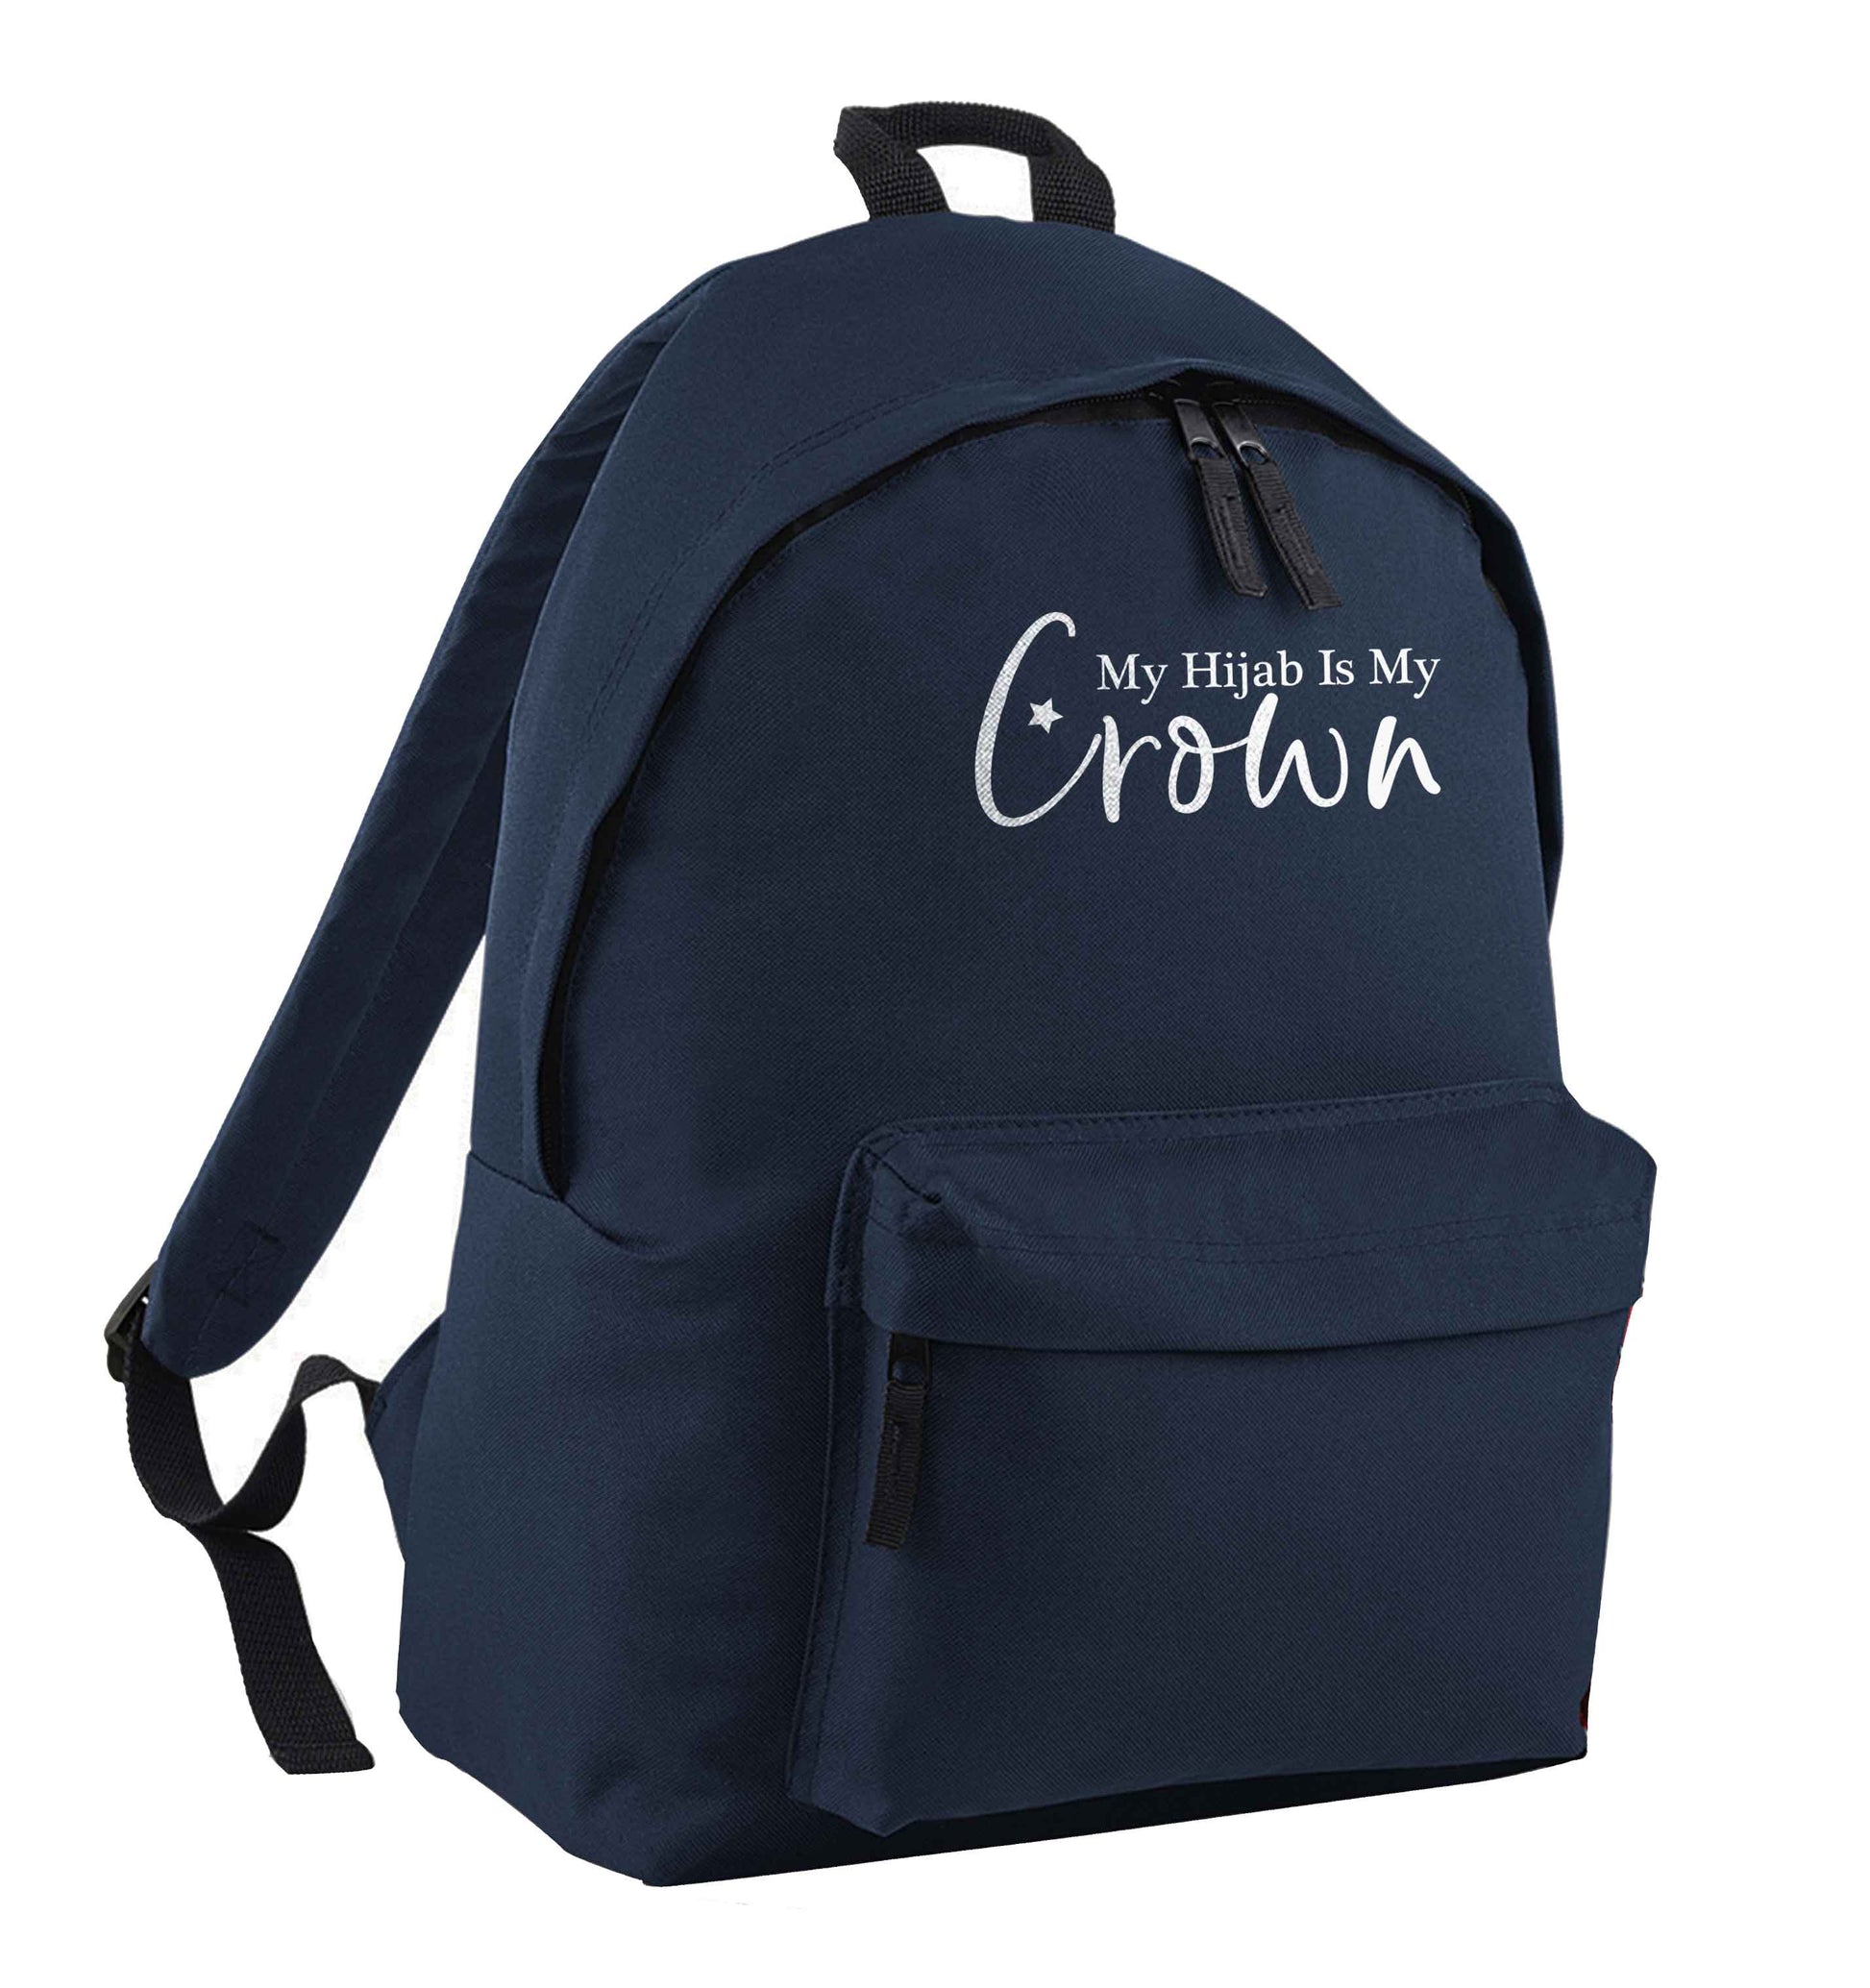 My hijab is my crown navy children's backpack